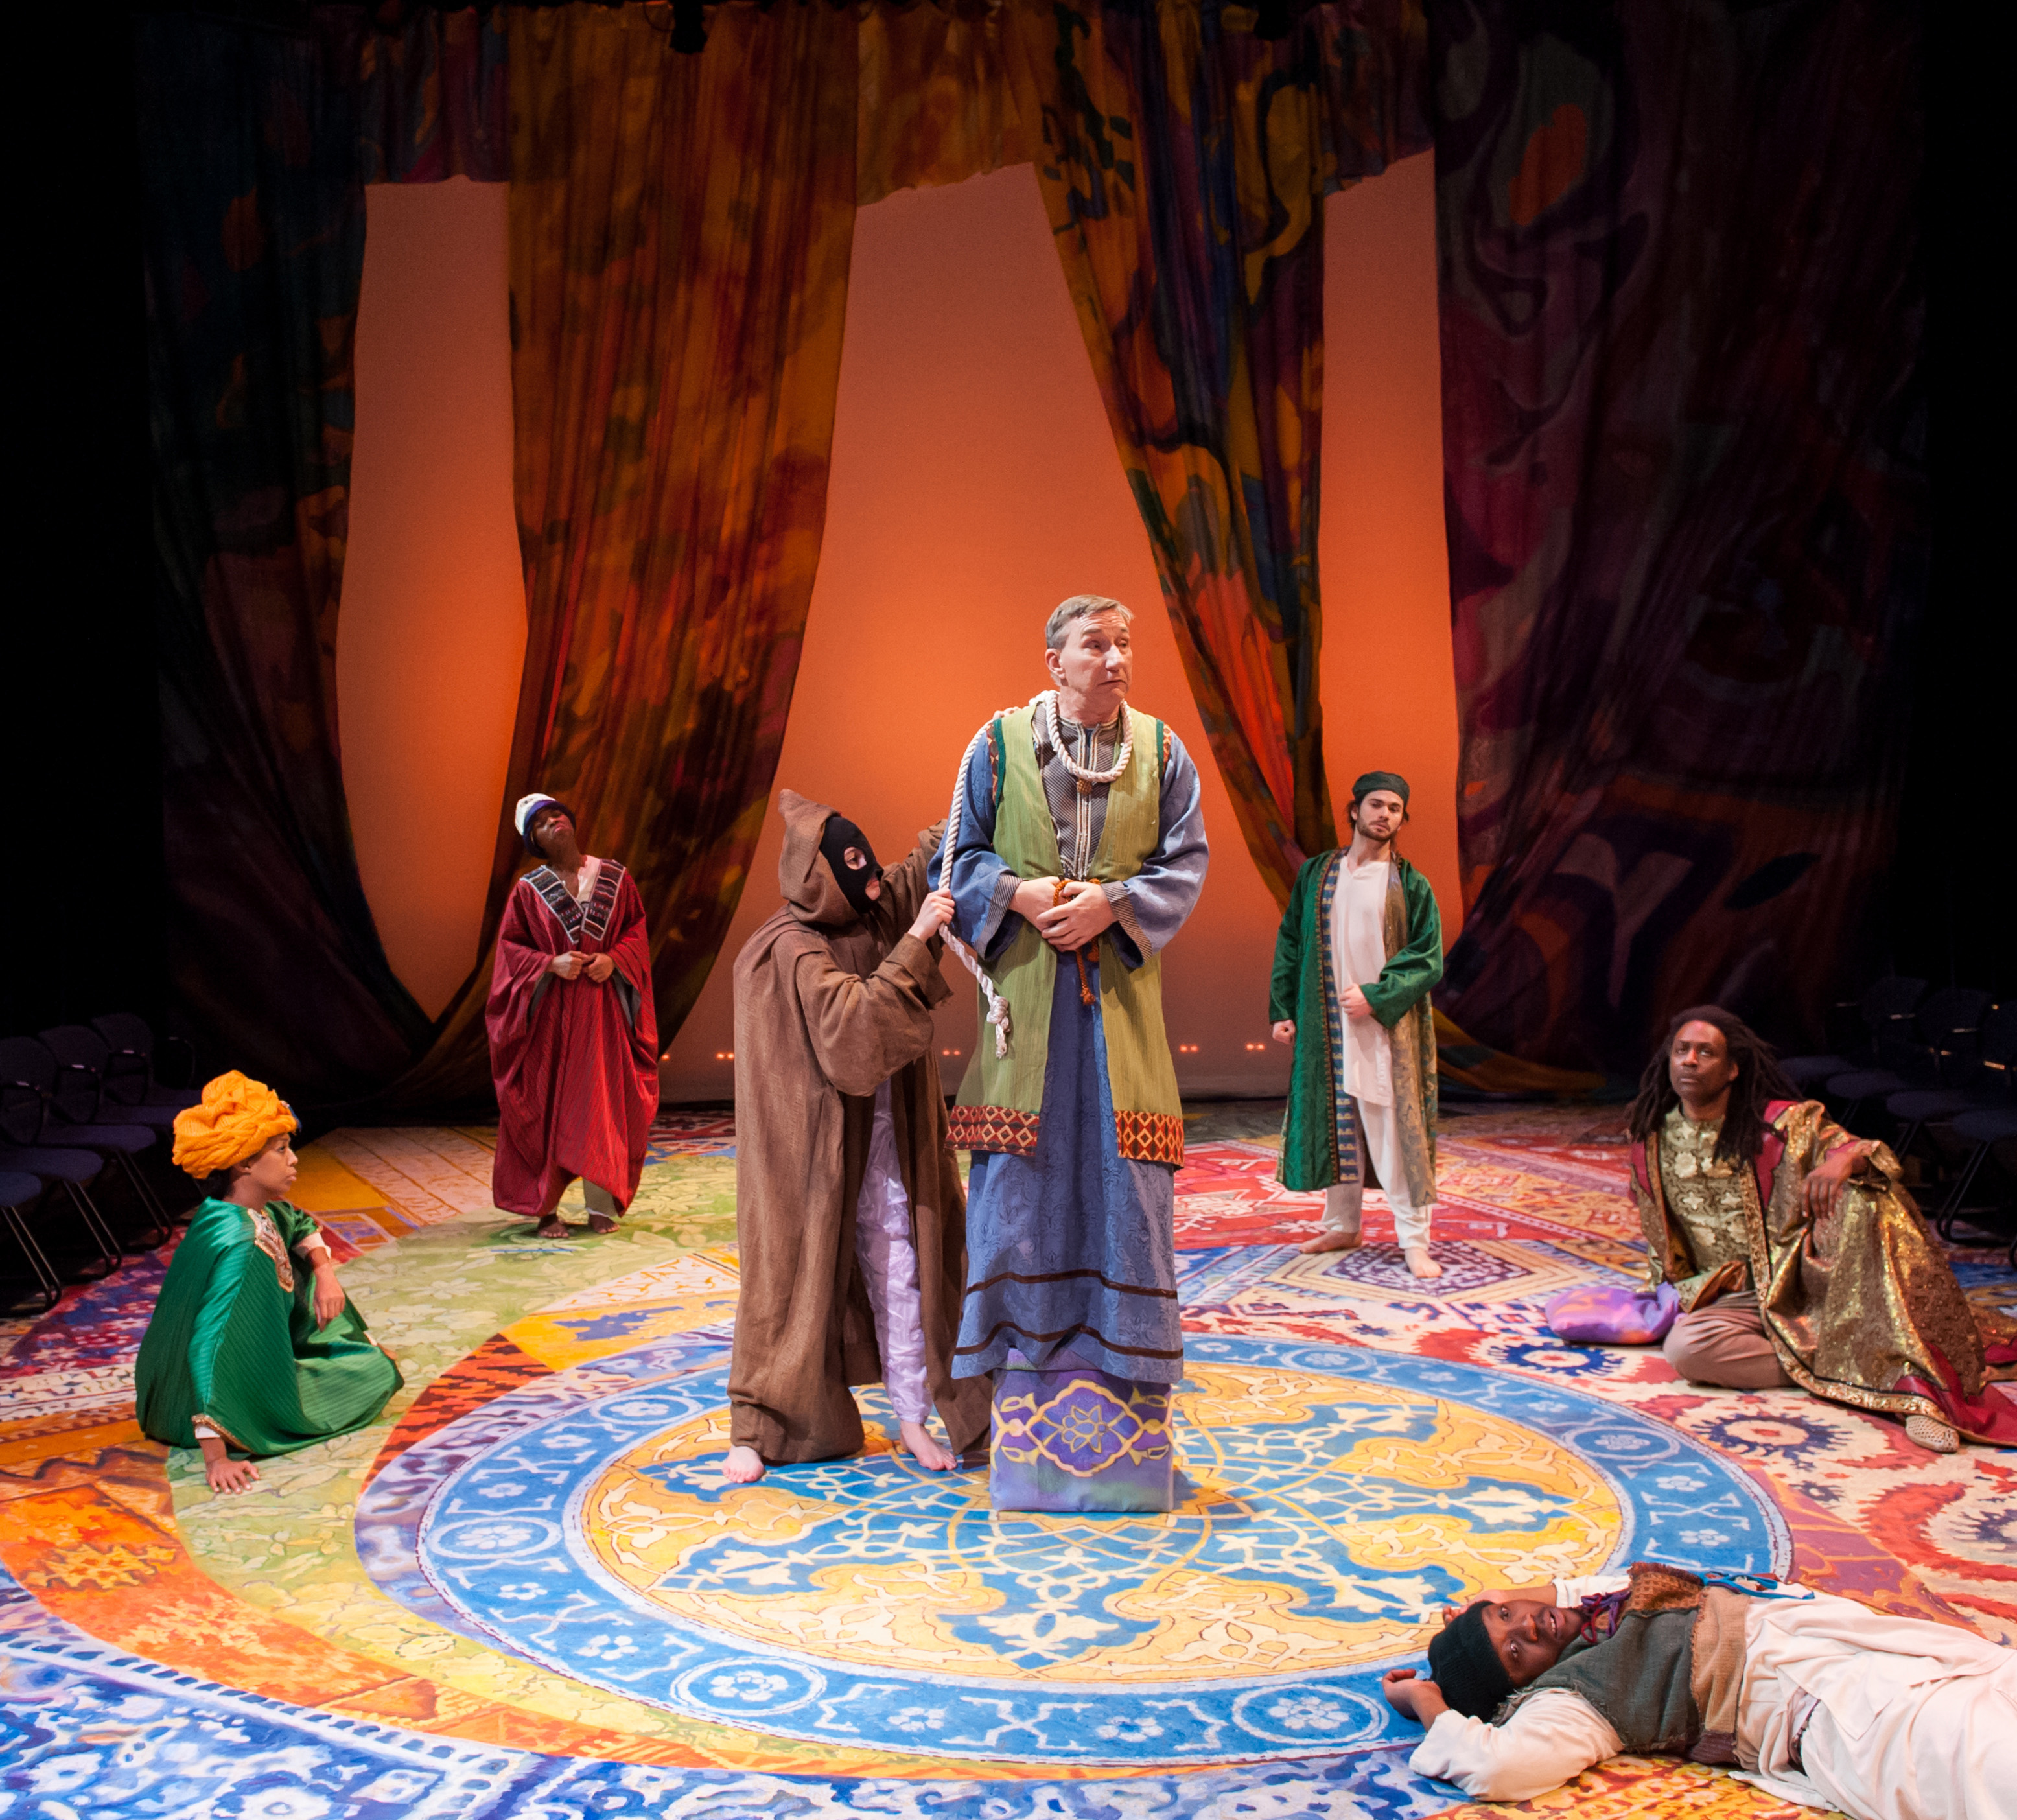 The cast of ARABIAN NIGHTS. Photo: A.R. Sinclair Photography.